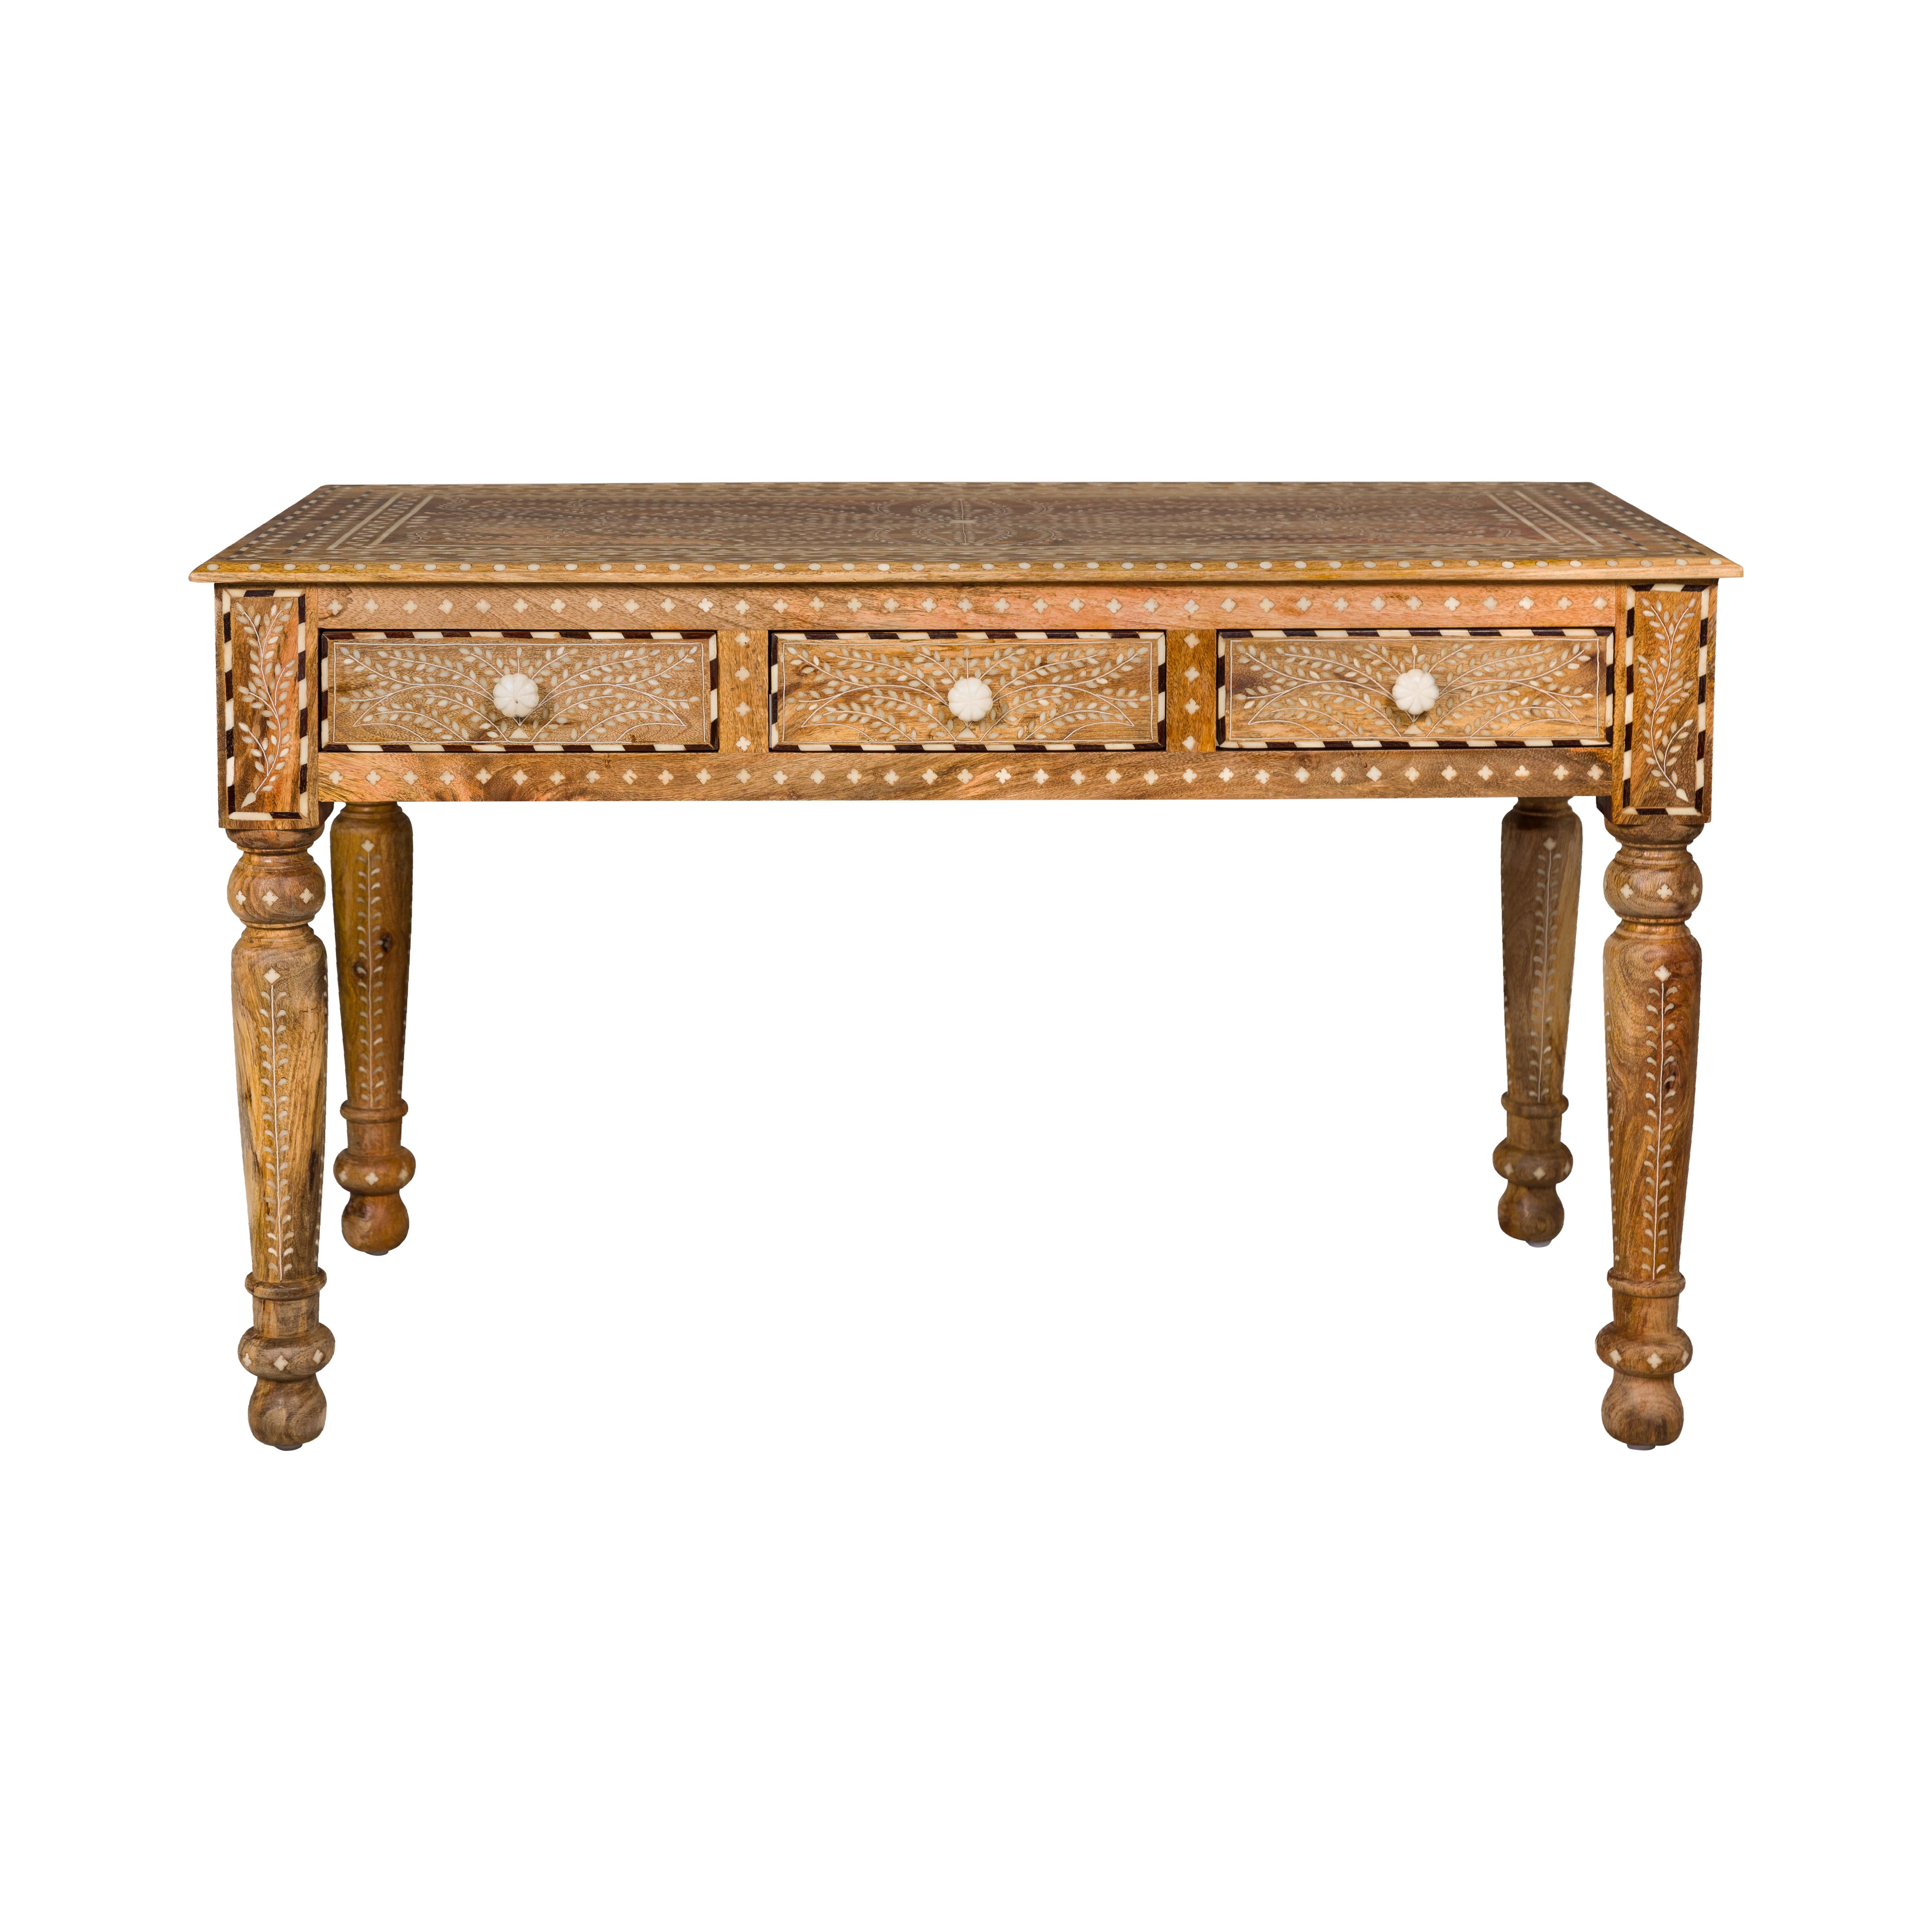 Anglo Indian Style Mango Wood Desk with Drawers, Bone Inlay and Light Patina For Sale 11